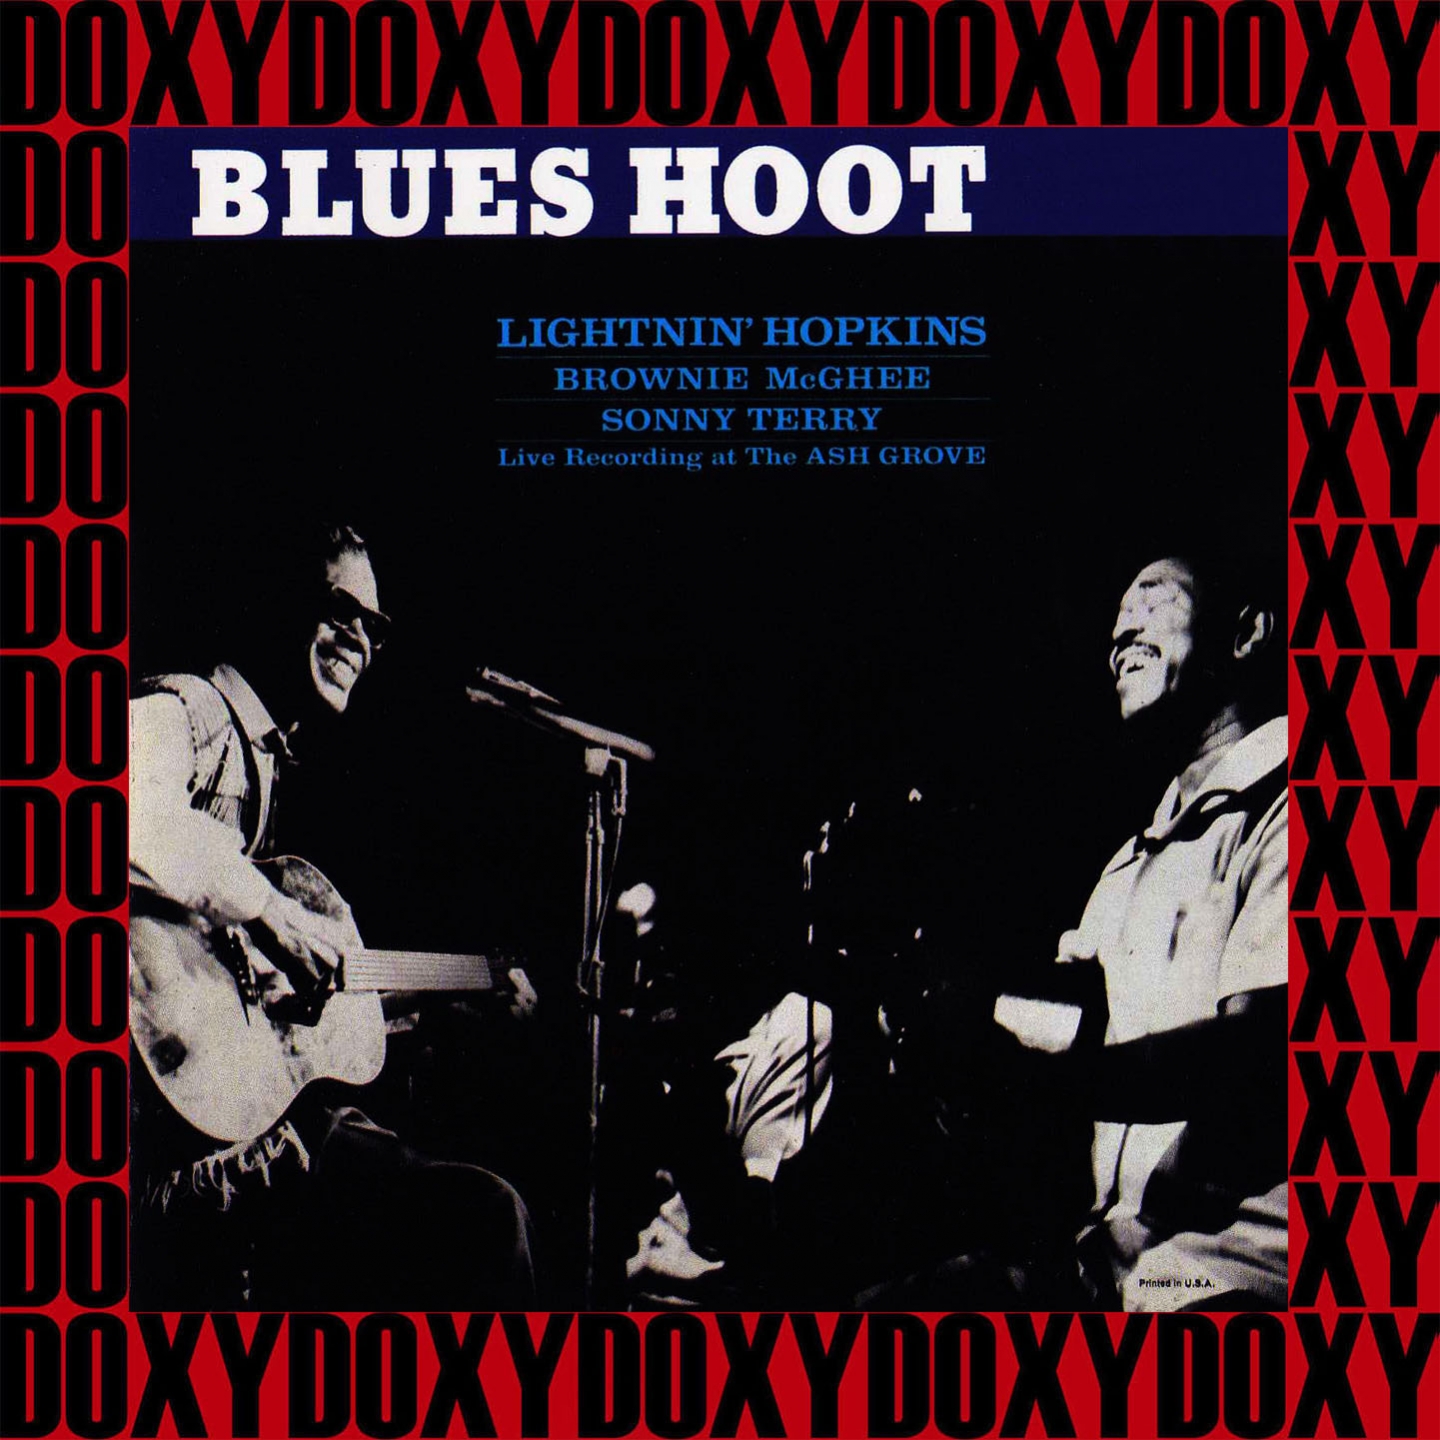 Blues For The Lowlands (Recorded Live at The Ash Grove, Hollywood, 1961)